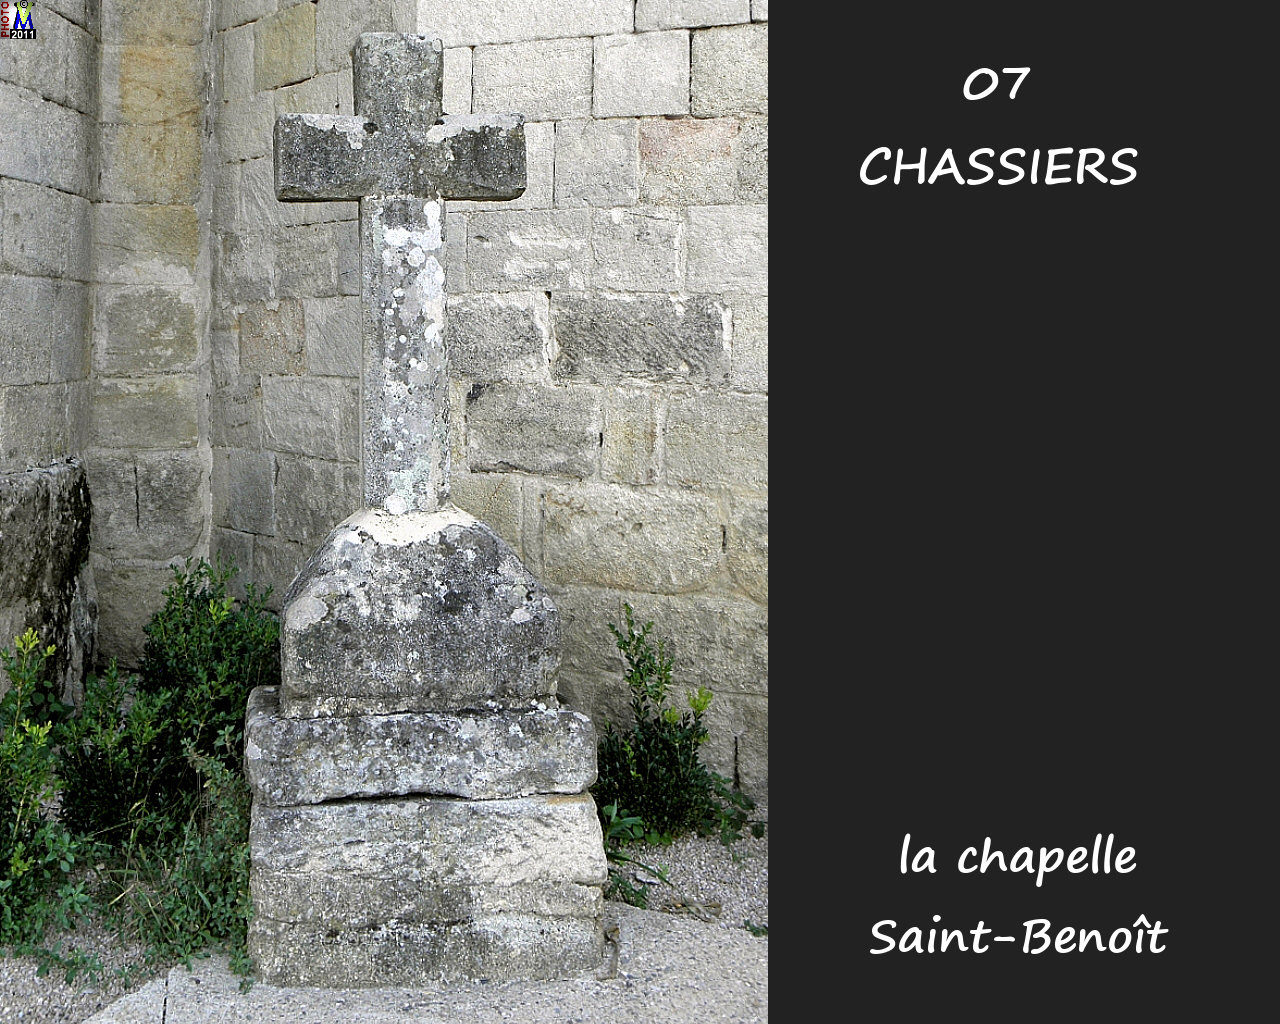 07CHASSIERS_chapelle_300.jpg